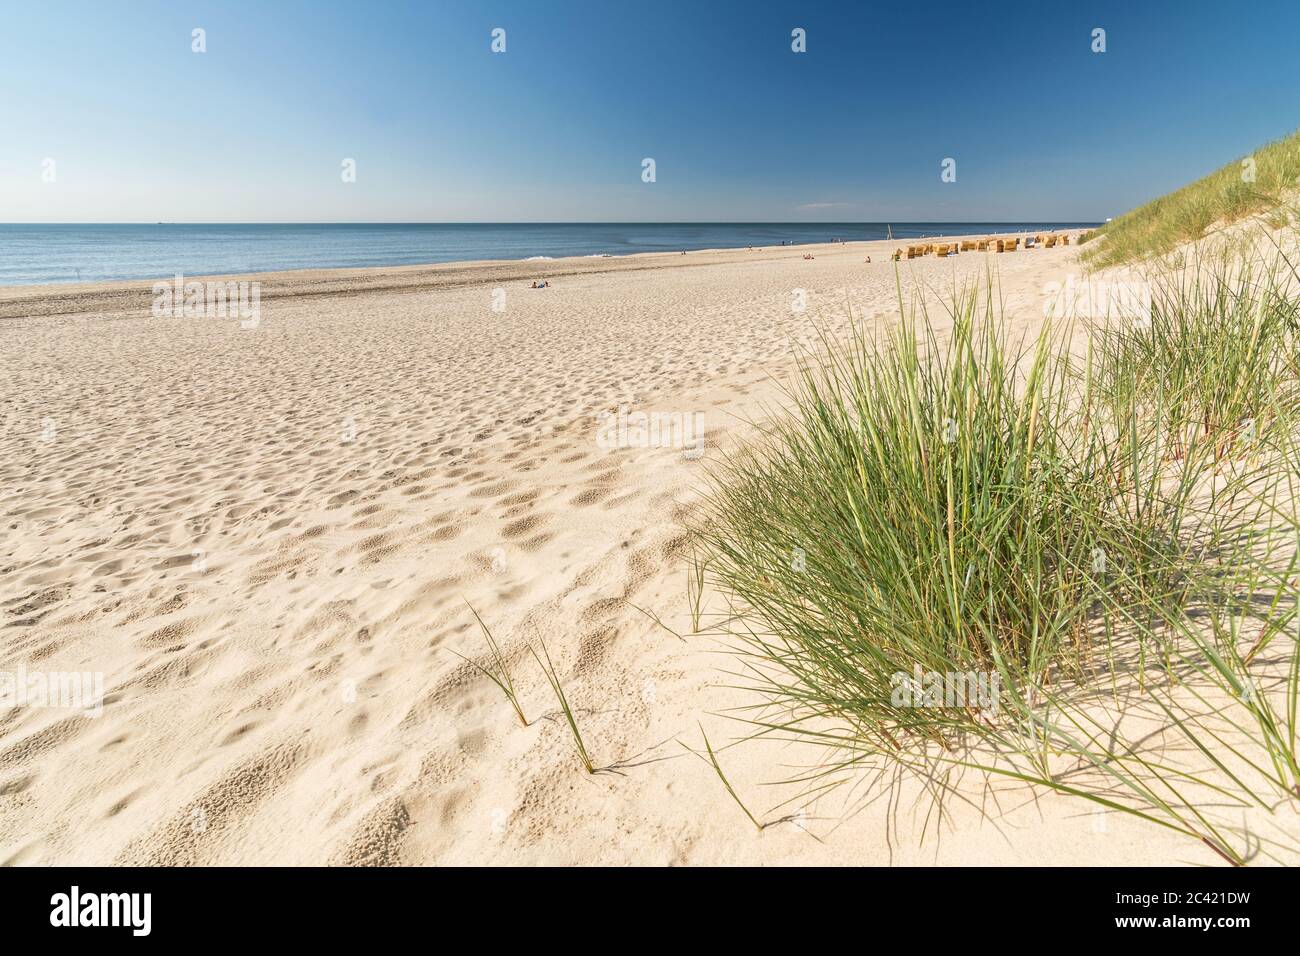 Beach grass and sand on the island of Sylt, Germany Stock Photo